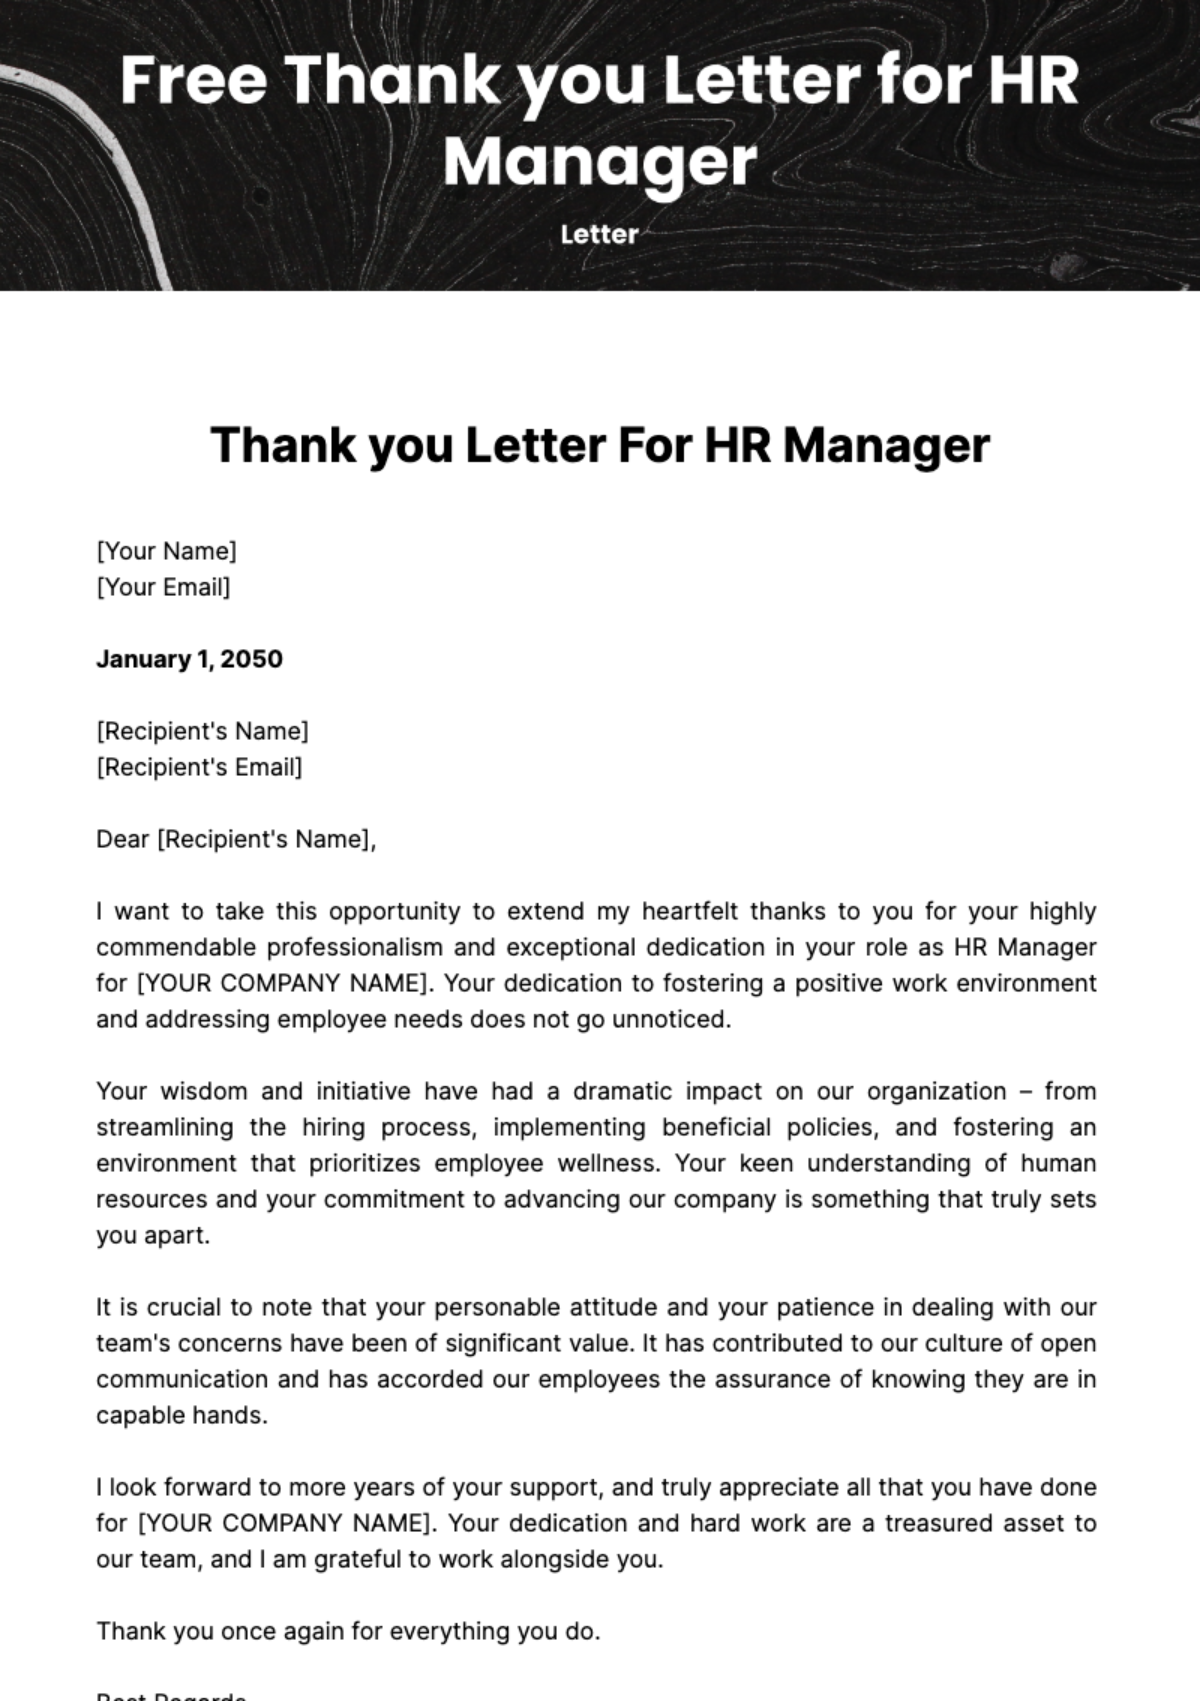 Free Thank you Letter for HR Manager Template